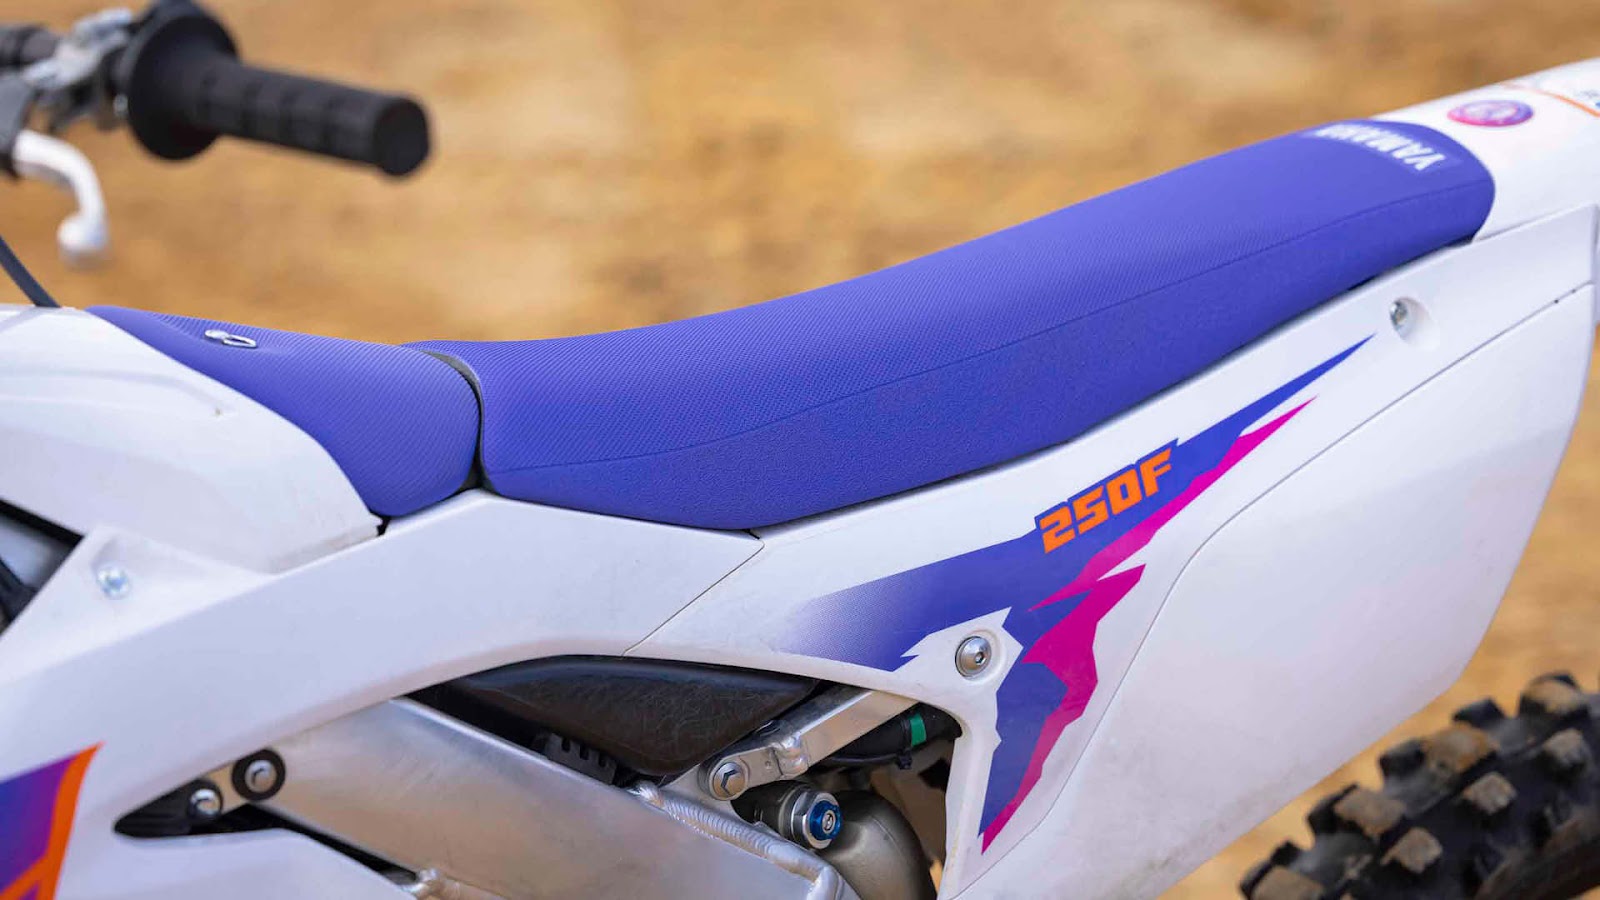 Narrower and flatter, the new YZ offers a more natural and aggressive riding position, complemented by an even more appealing aesthetic.